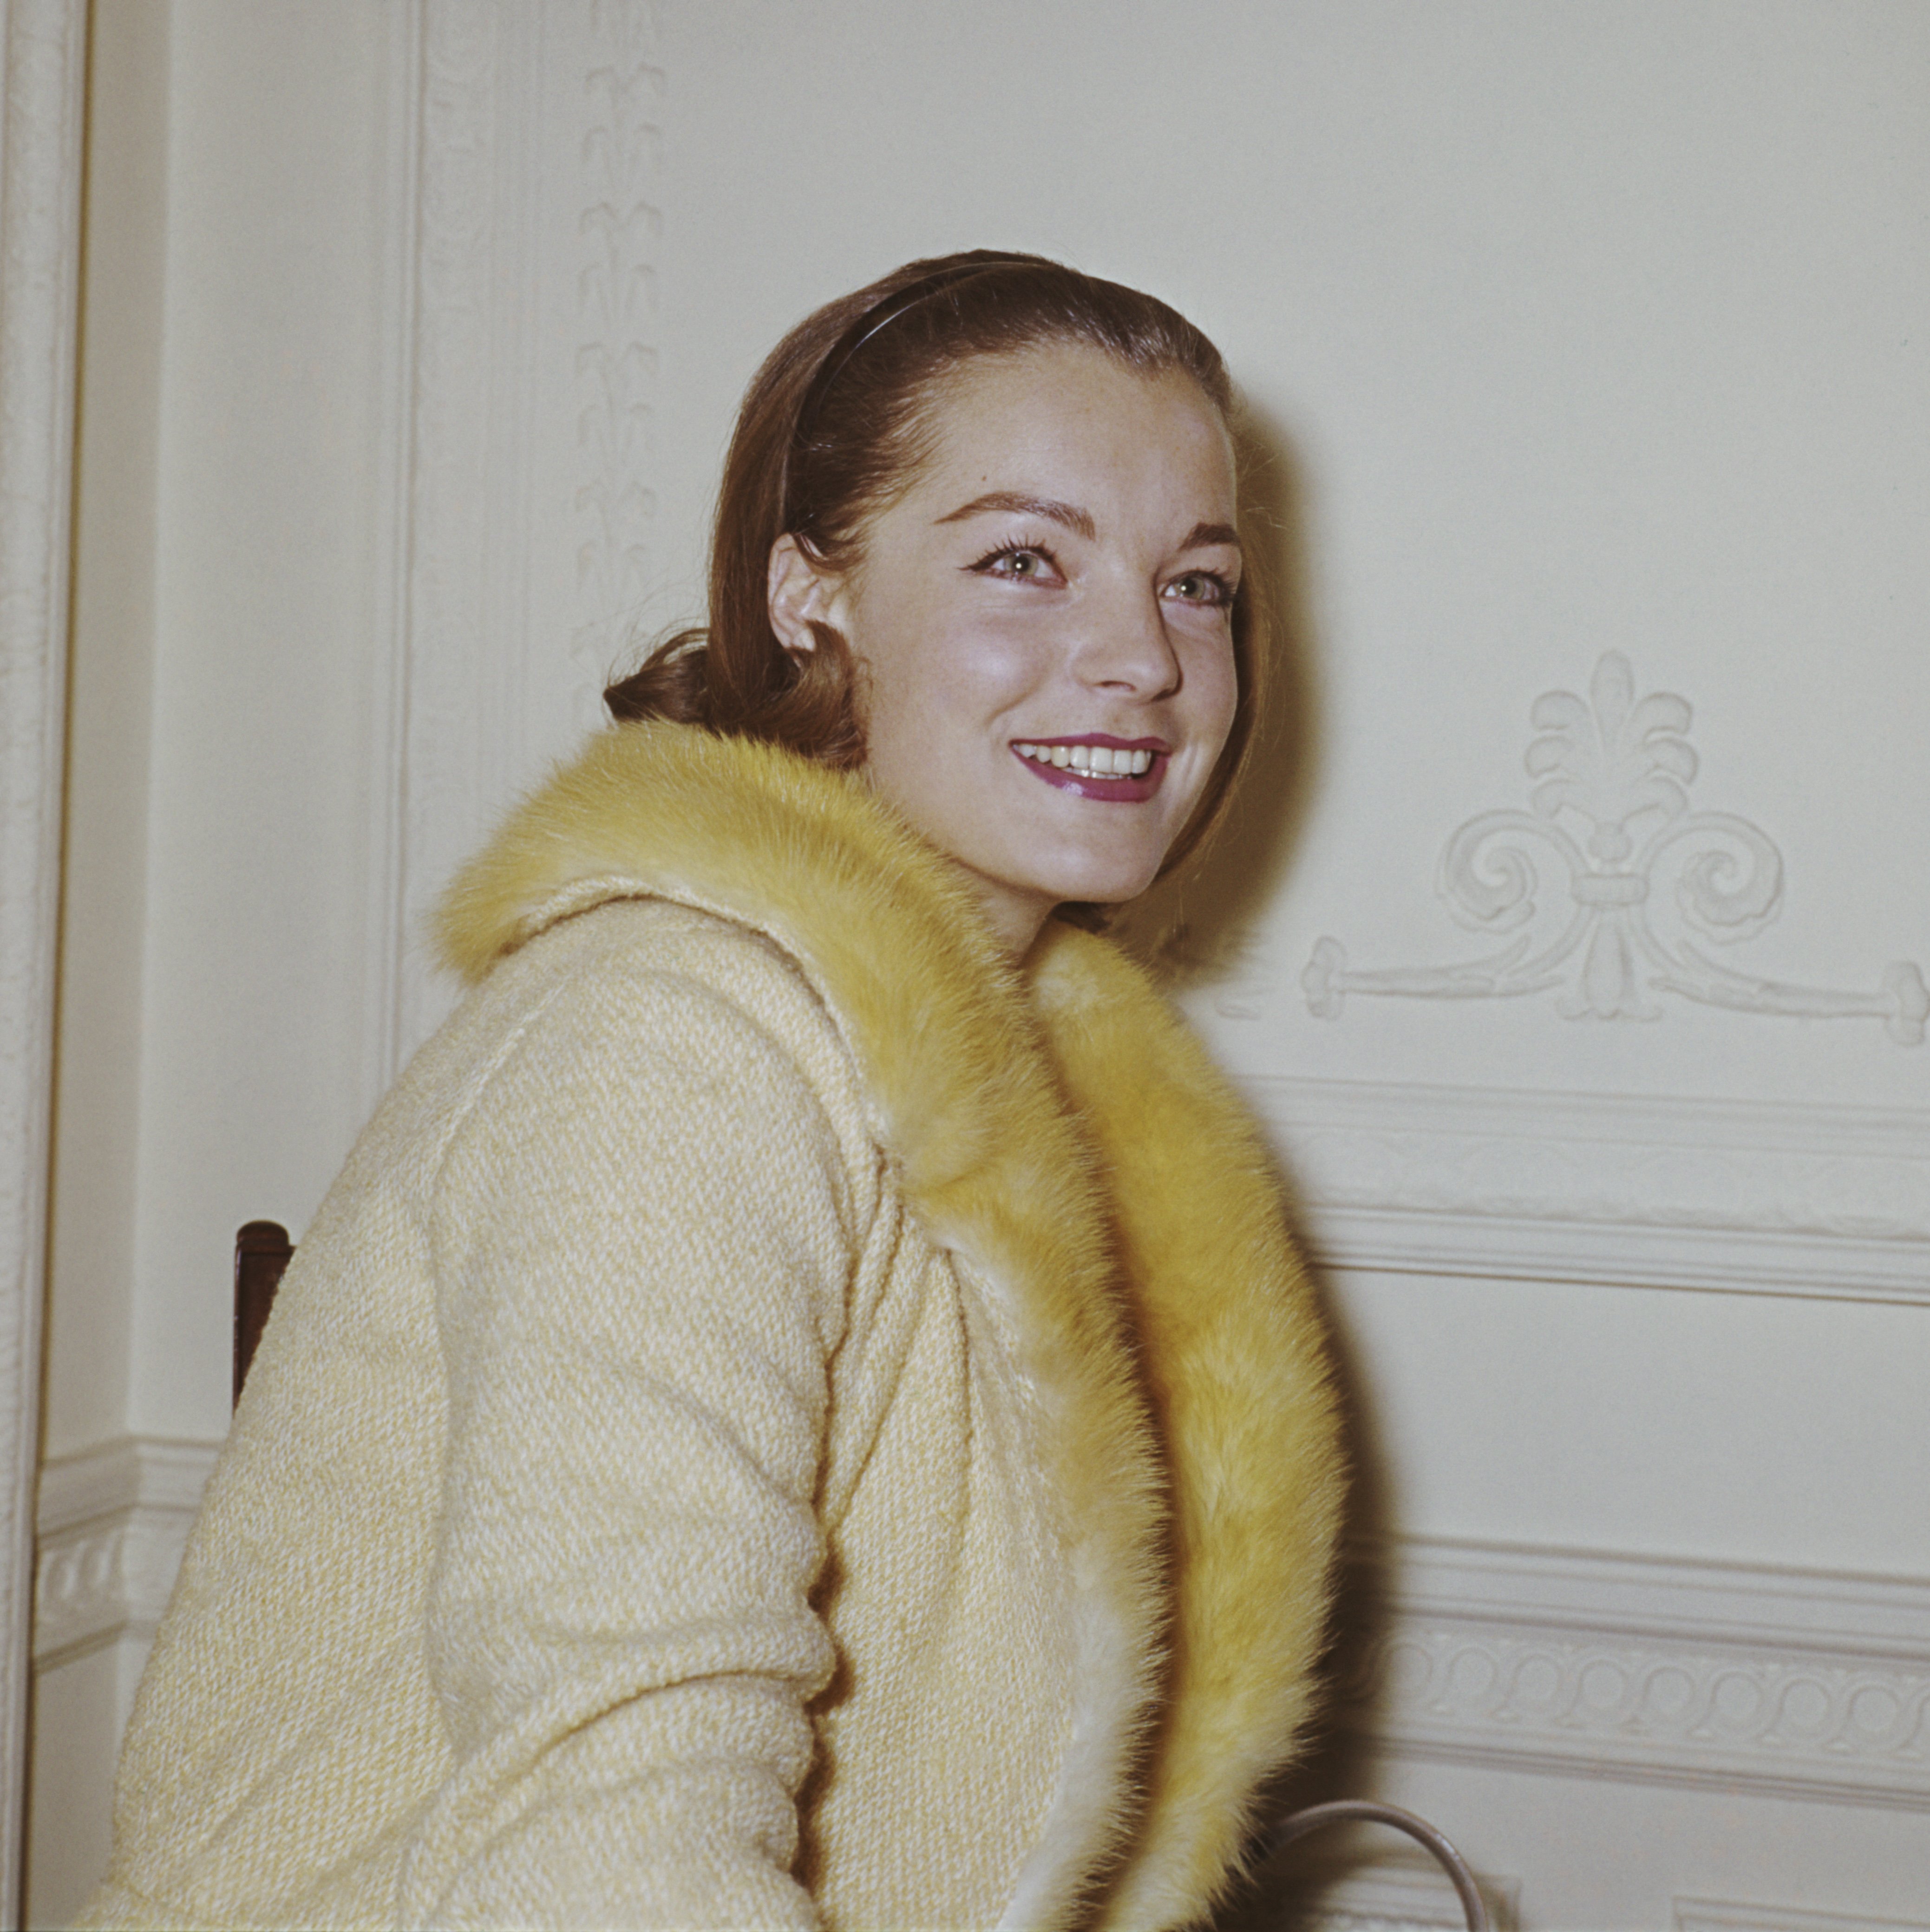 The Austrian actress Romy Schneider at the Savoy Hotel in London, January 1964, at a reception for the book author 